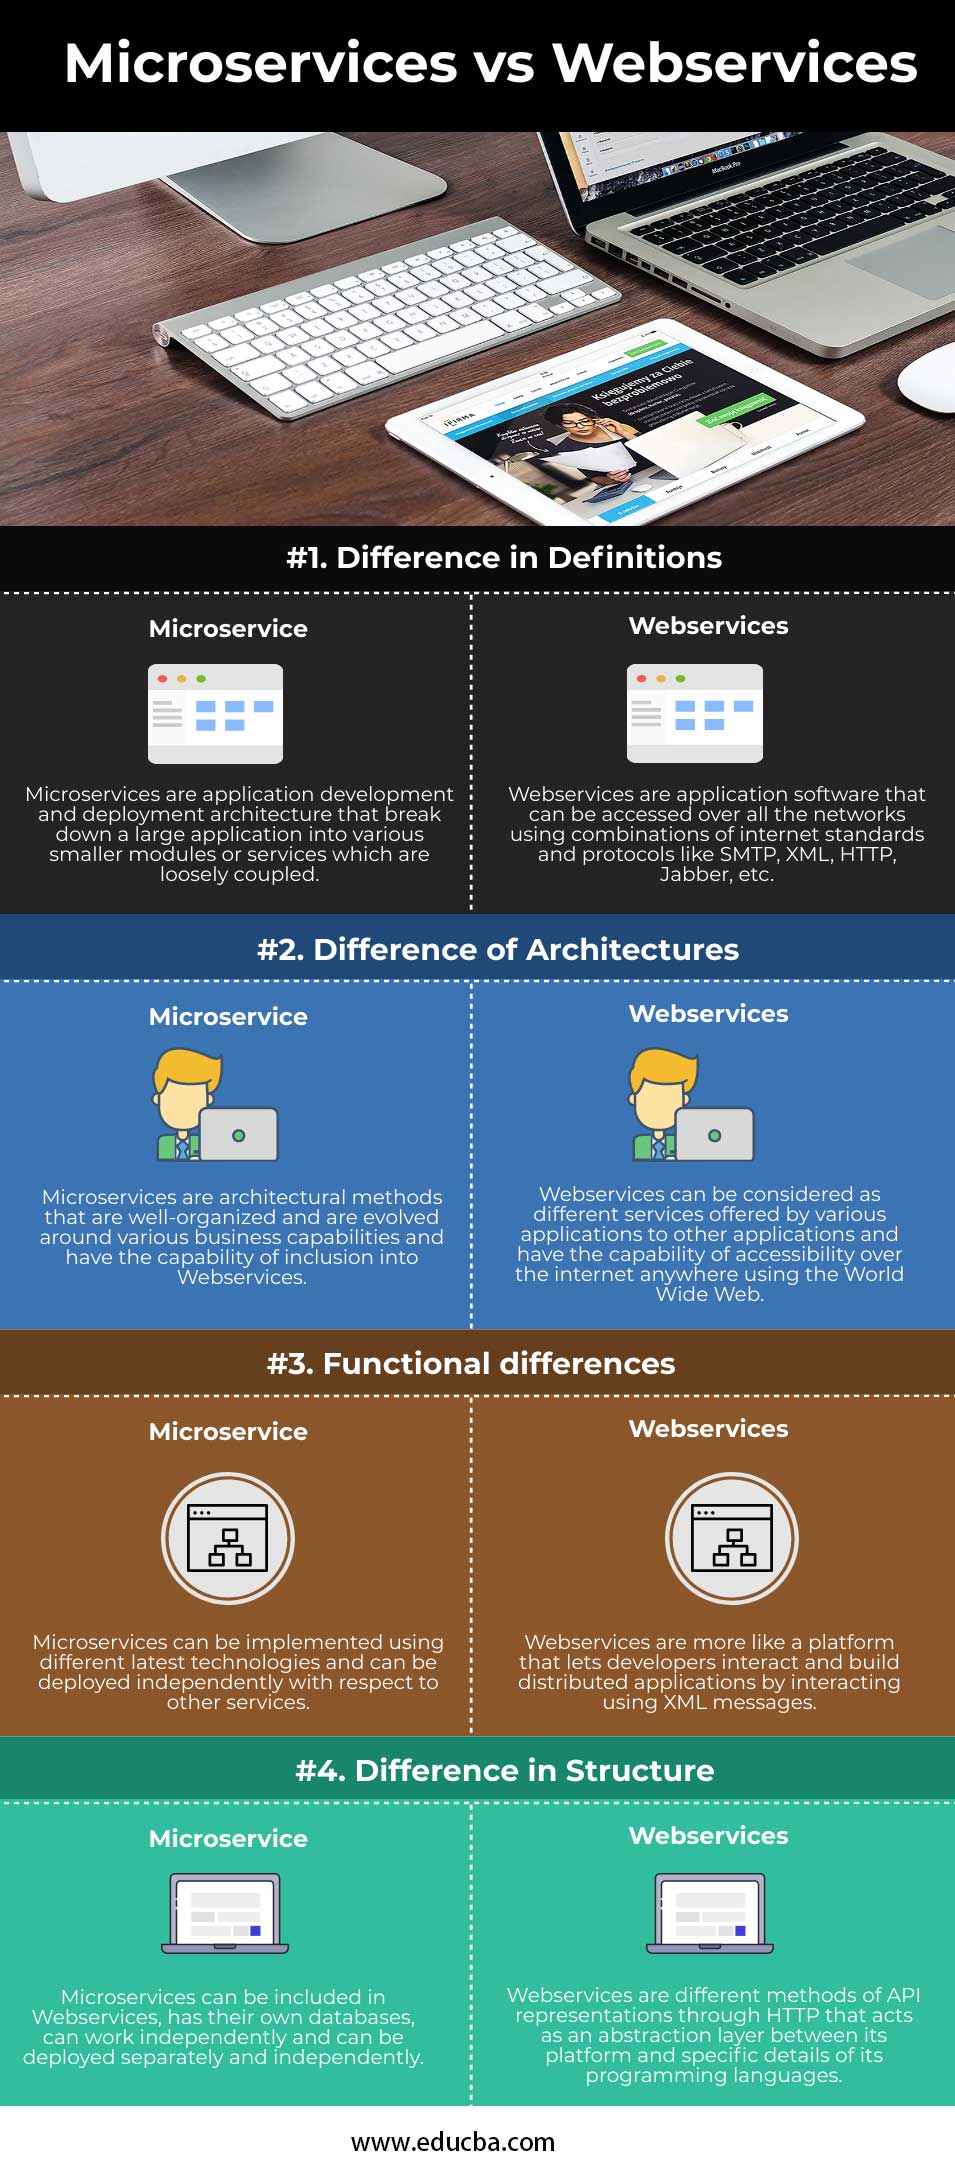 Microservices-vs-Webservices-info